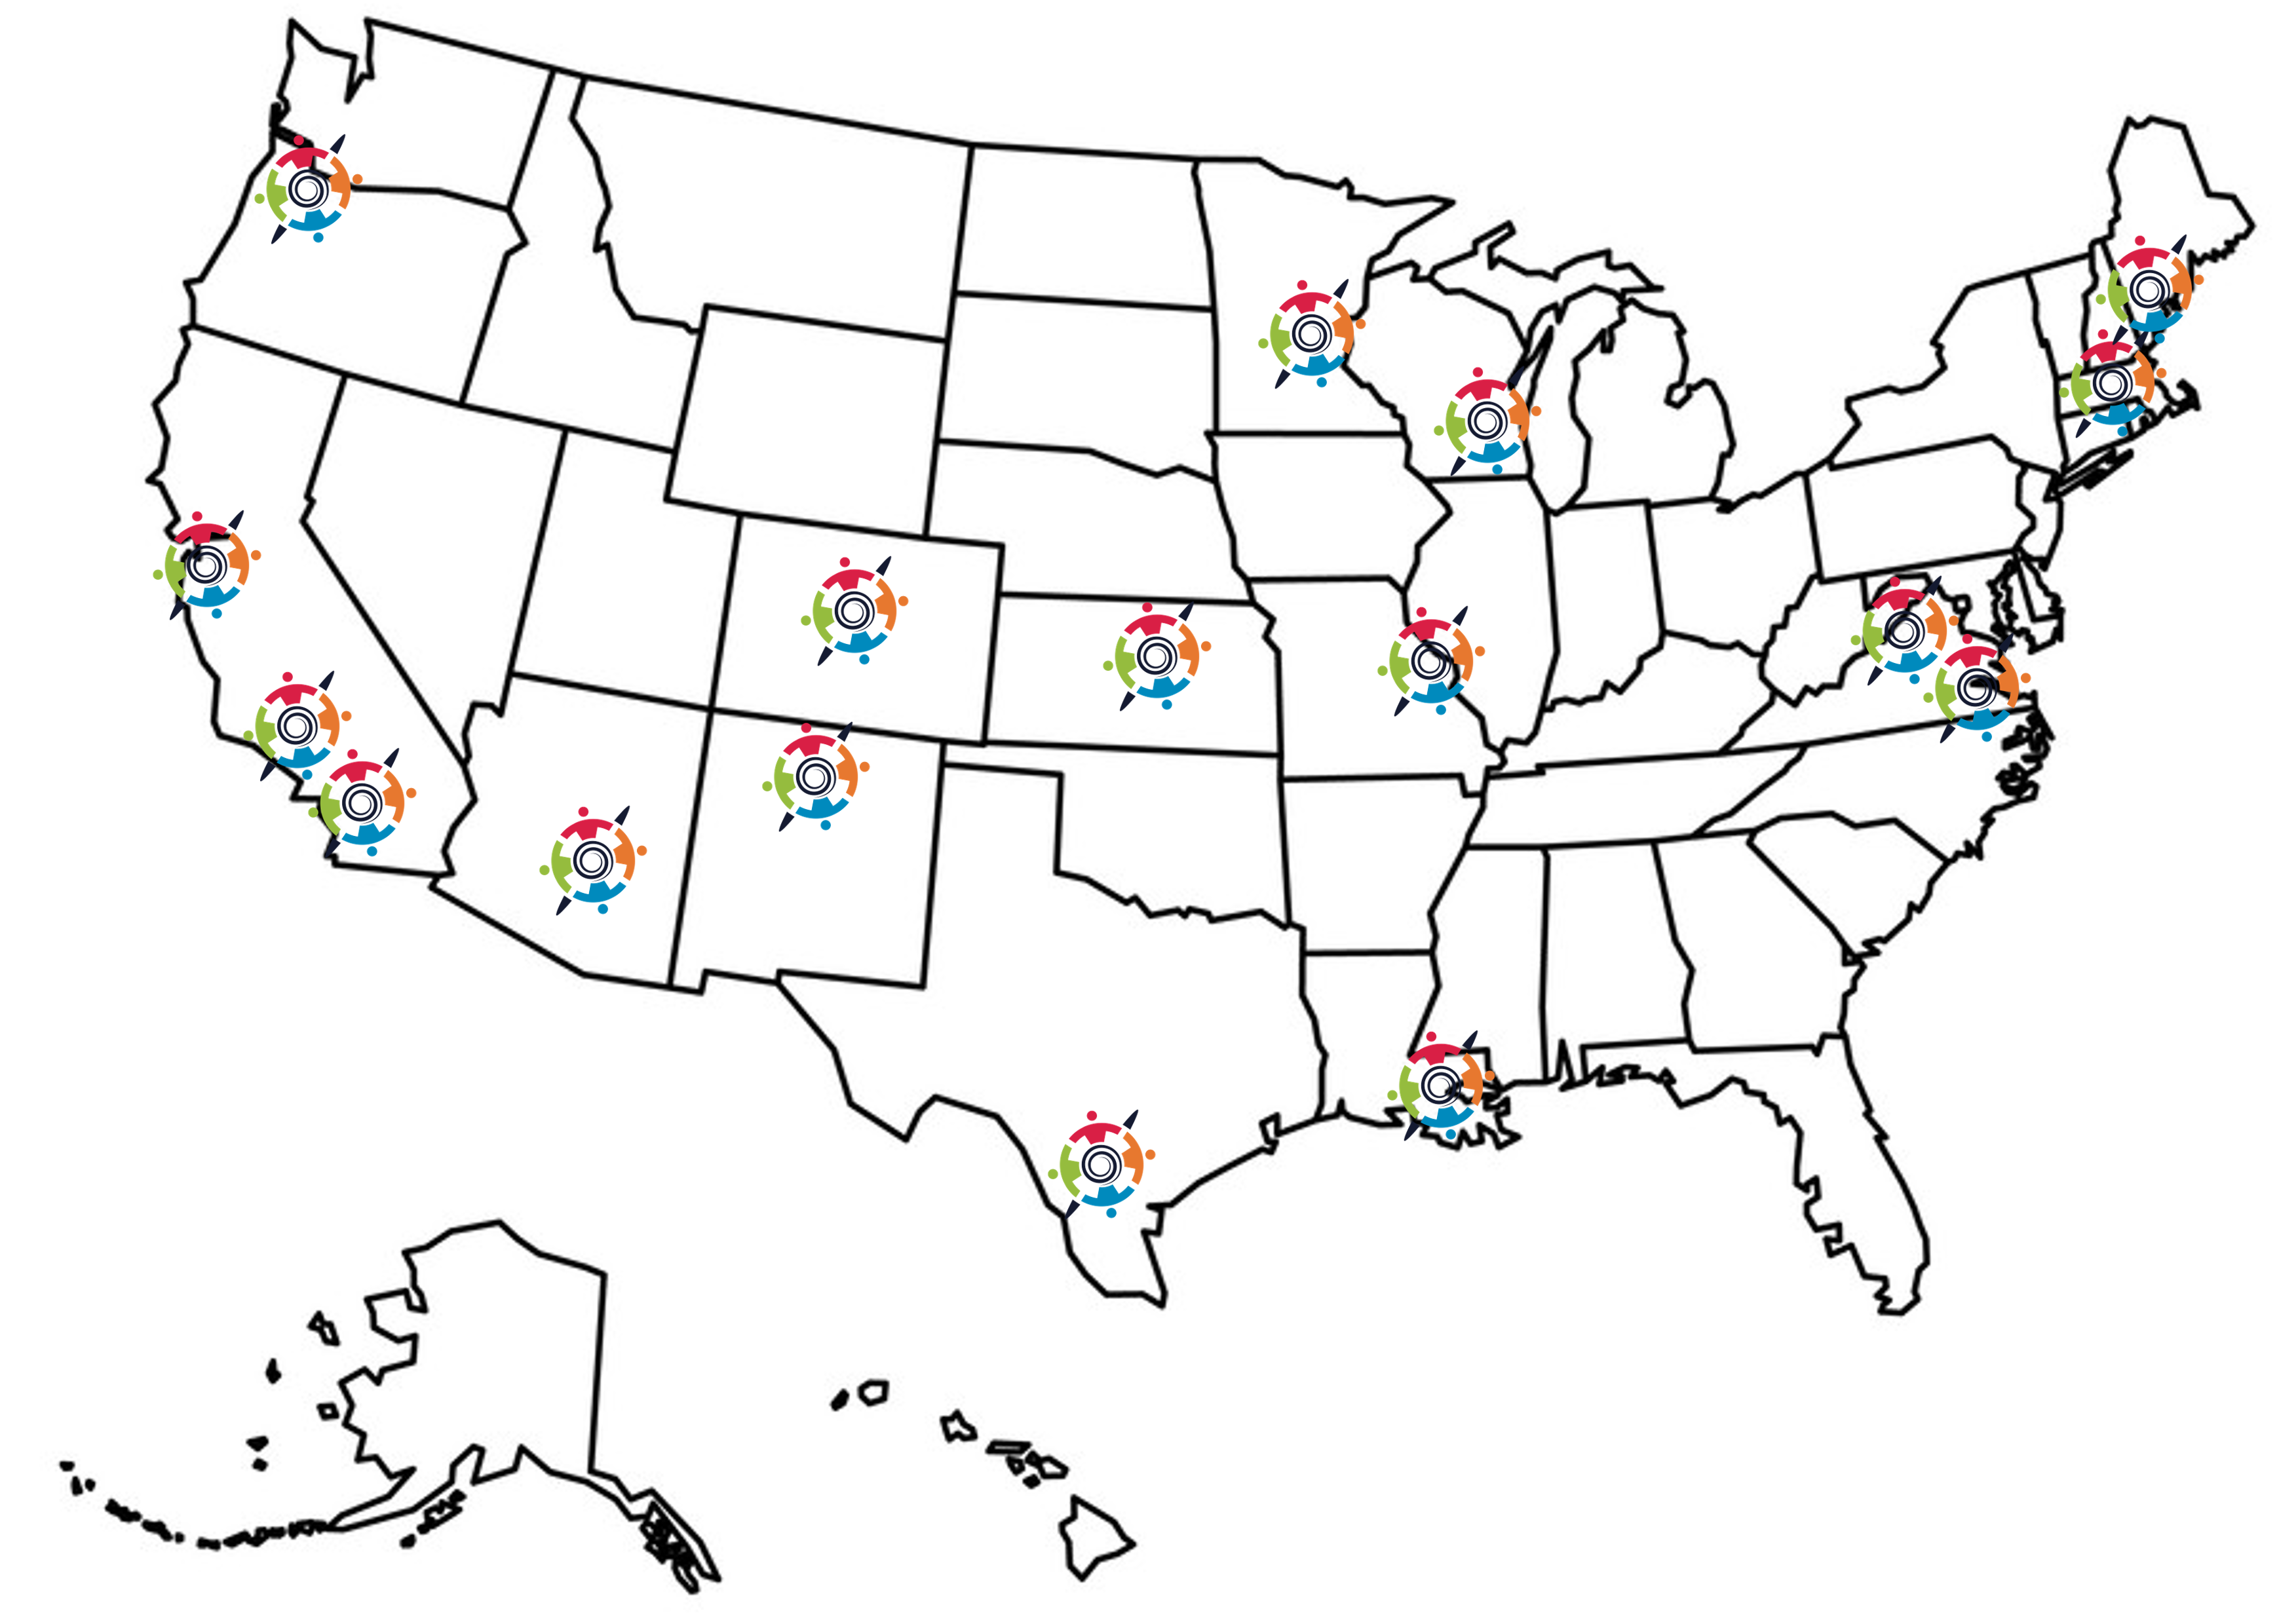 Locations of Active Care Ecosystem Programs in the USA